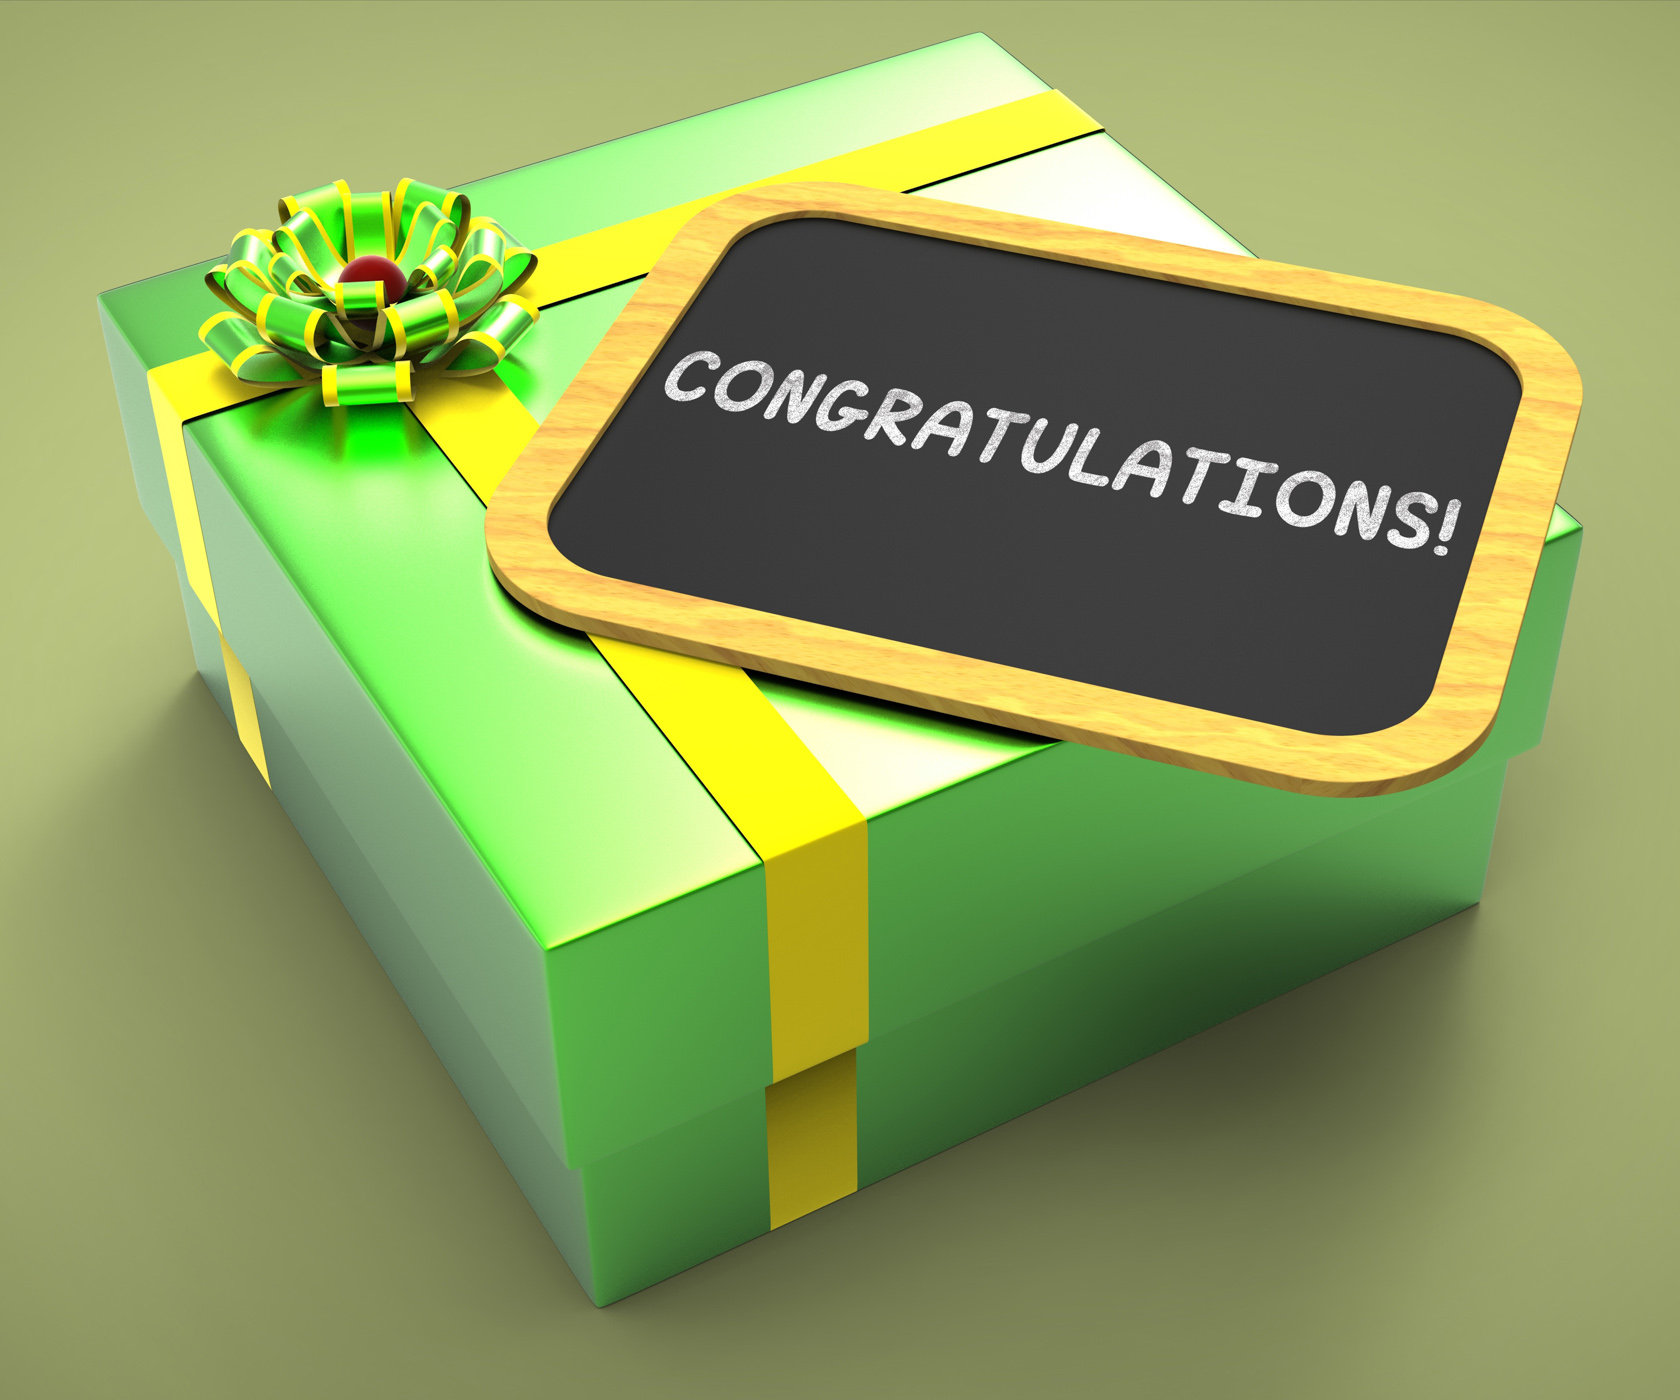 Congratulations Present Card Shows Accomplishments And Achievements, Greeting, Success, Succeed, Salutations, HQ Photo